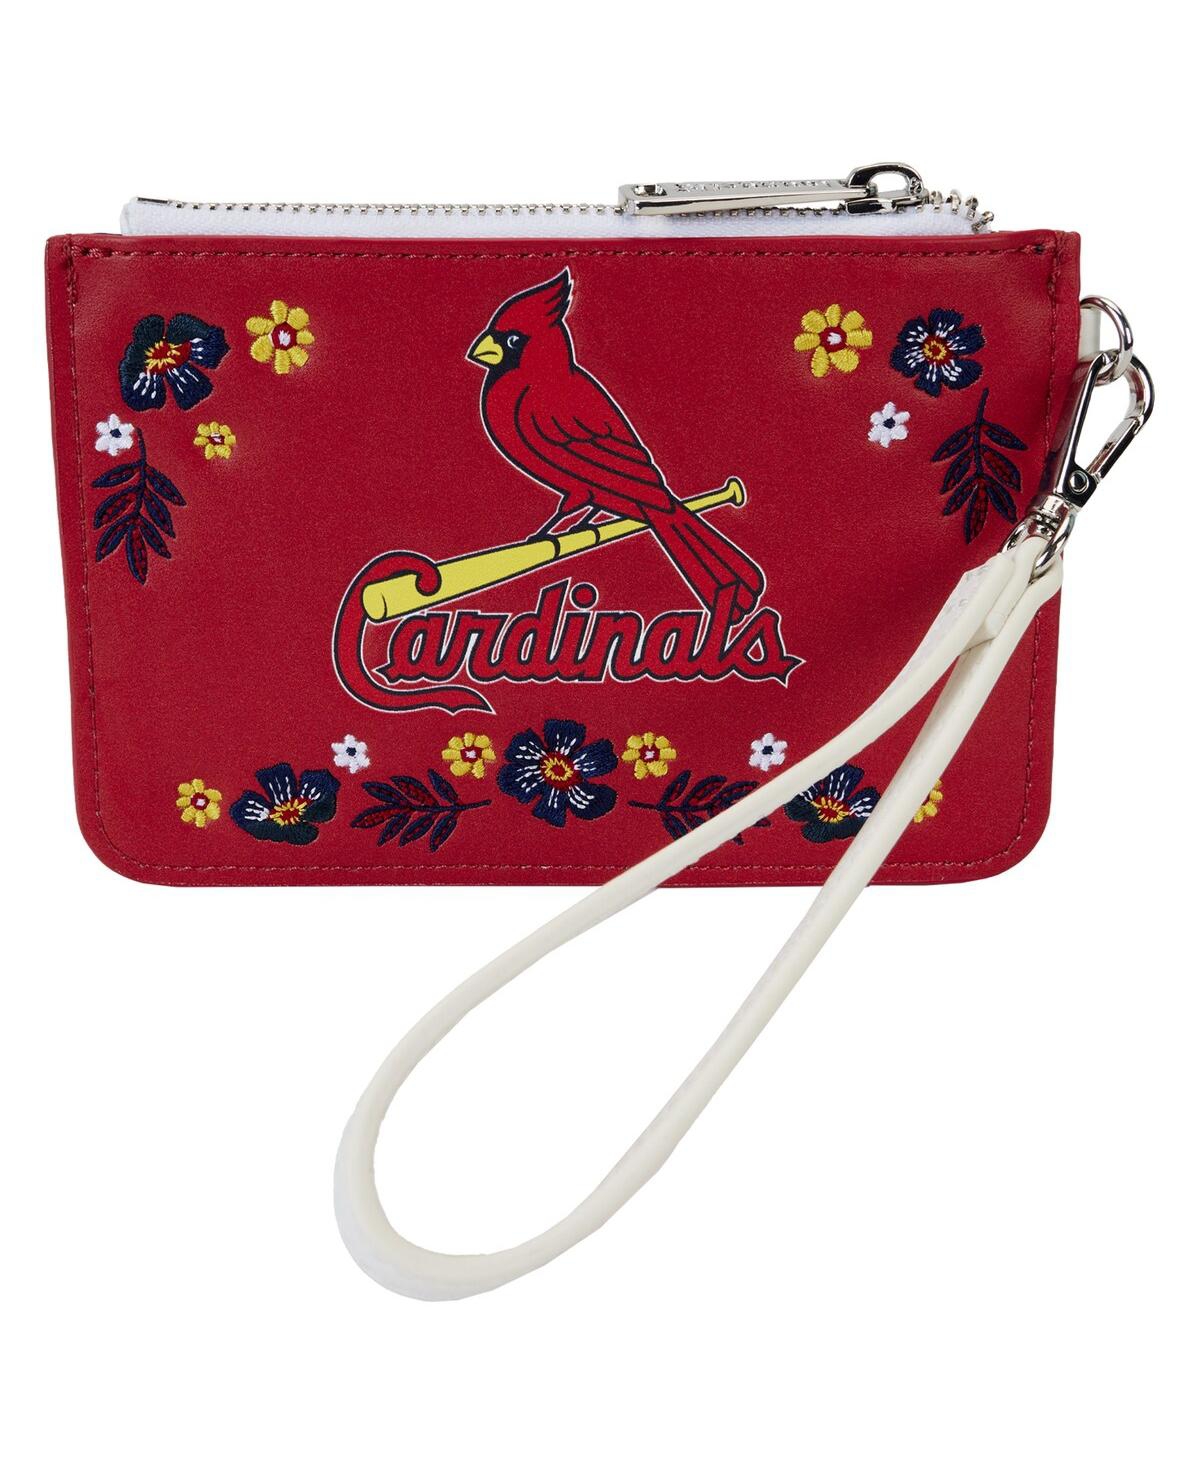 Shop Loungefly St. Louis Cardinals Floral Wrist Clutch In No Color